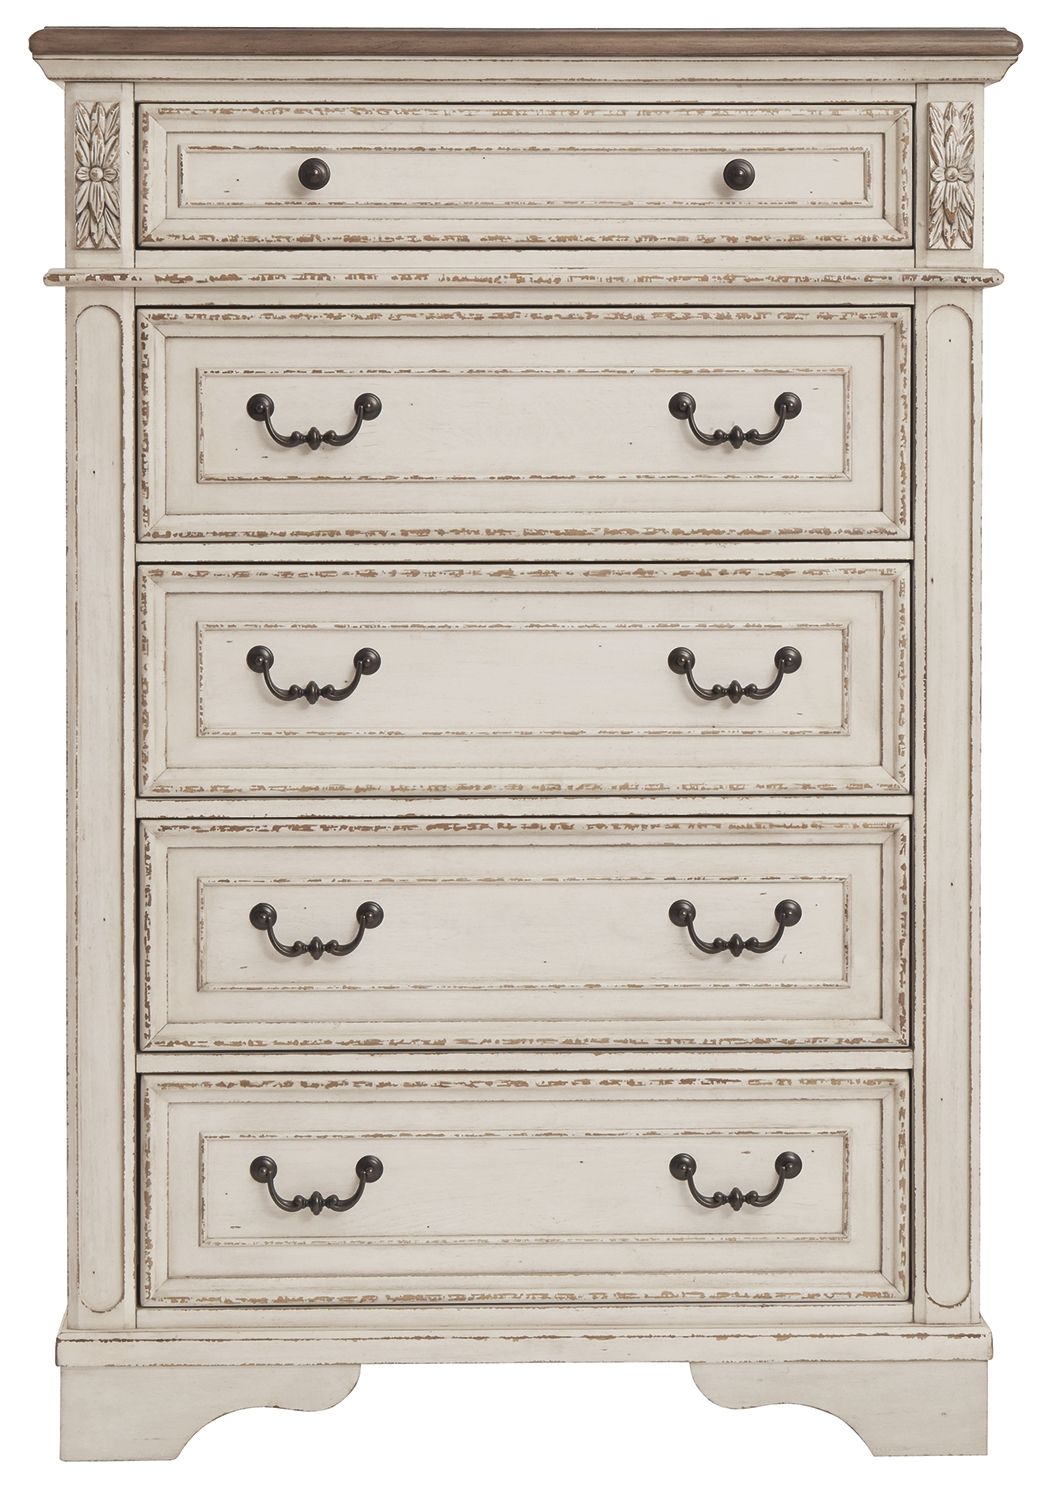 Realyn - White / Brown / Beige - Five Drawer Chest